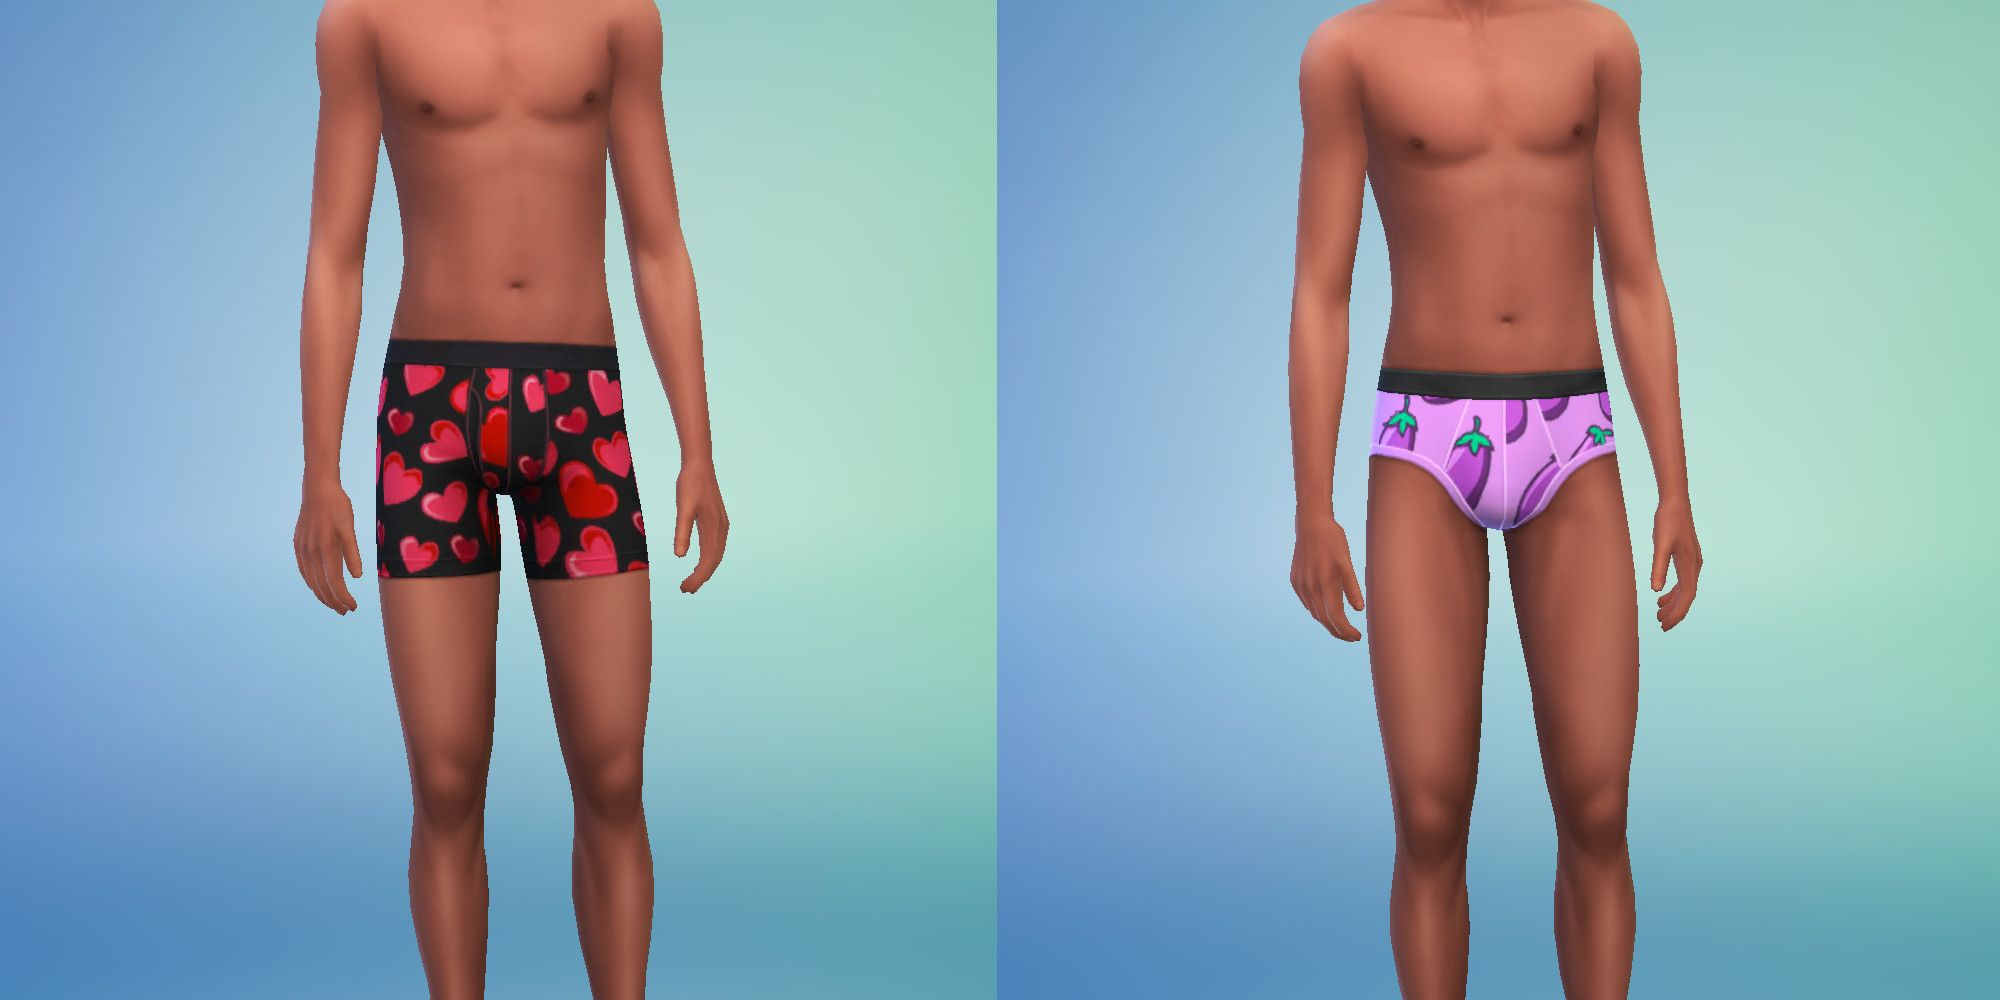 The Sims 4: All Outfits In The Simtimates Kit